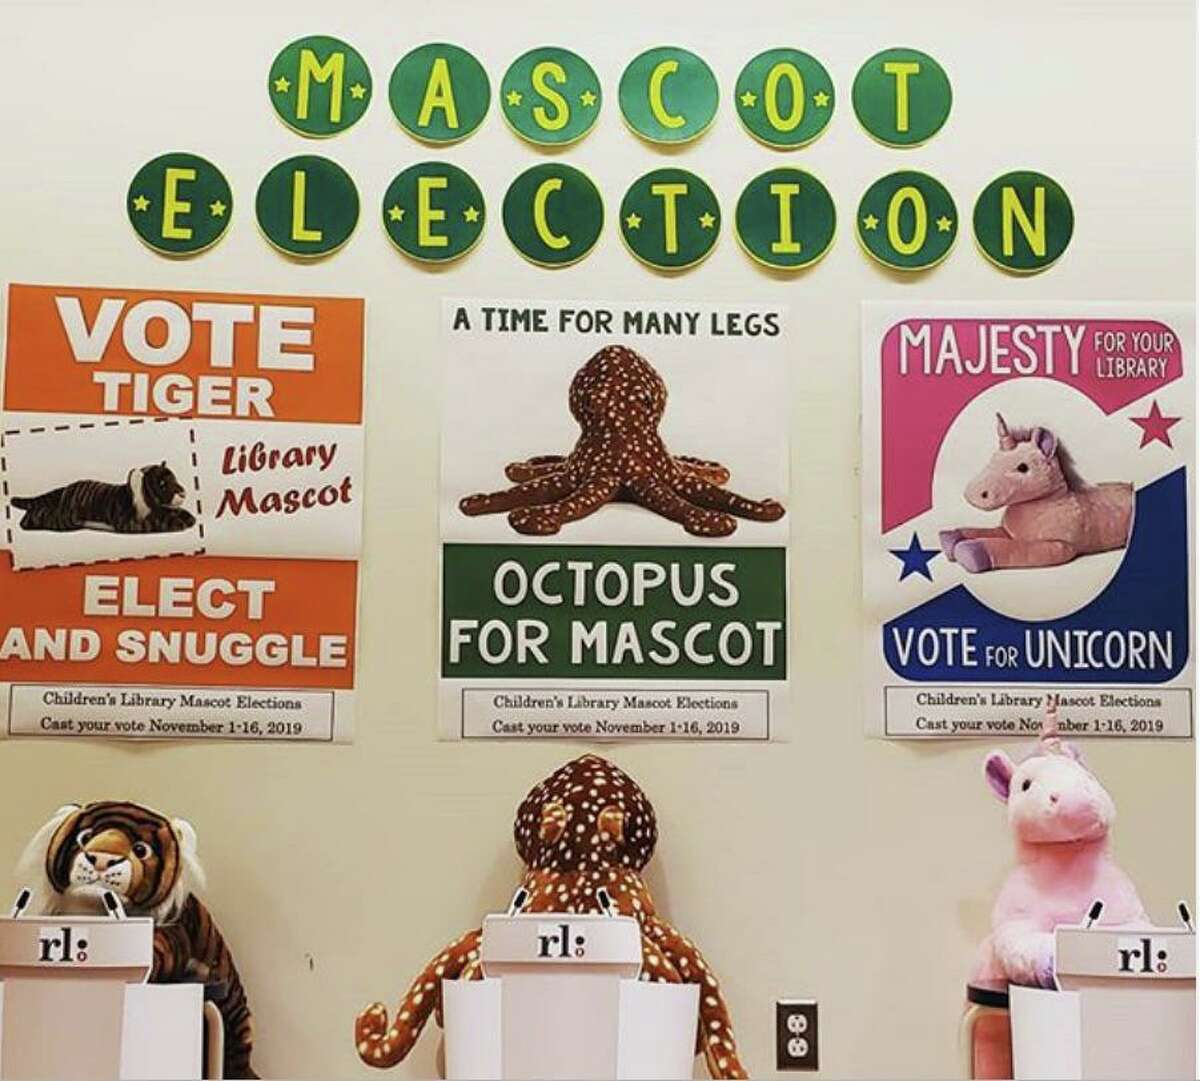 The Mascot Election at Ridgefield Library has three qualified candidates seeks voter approval.